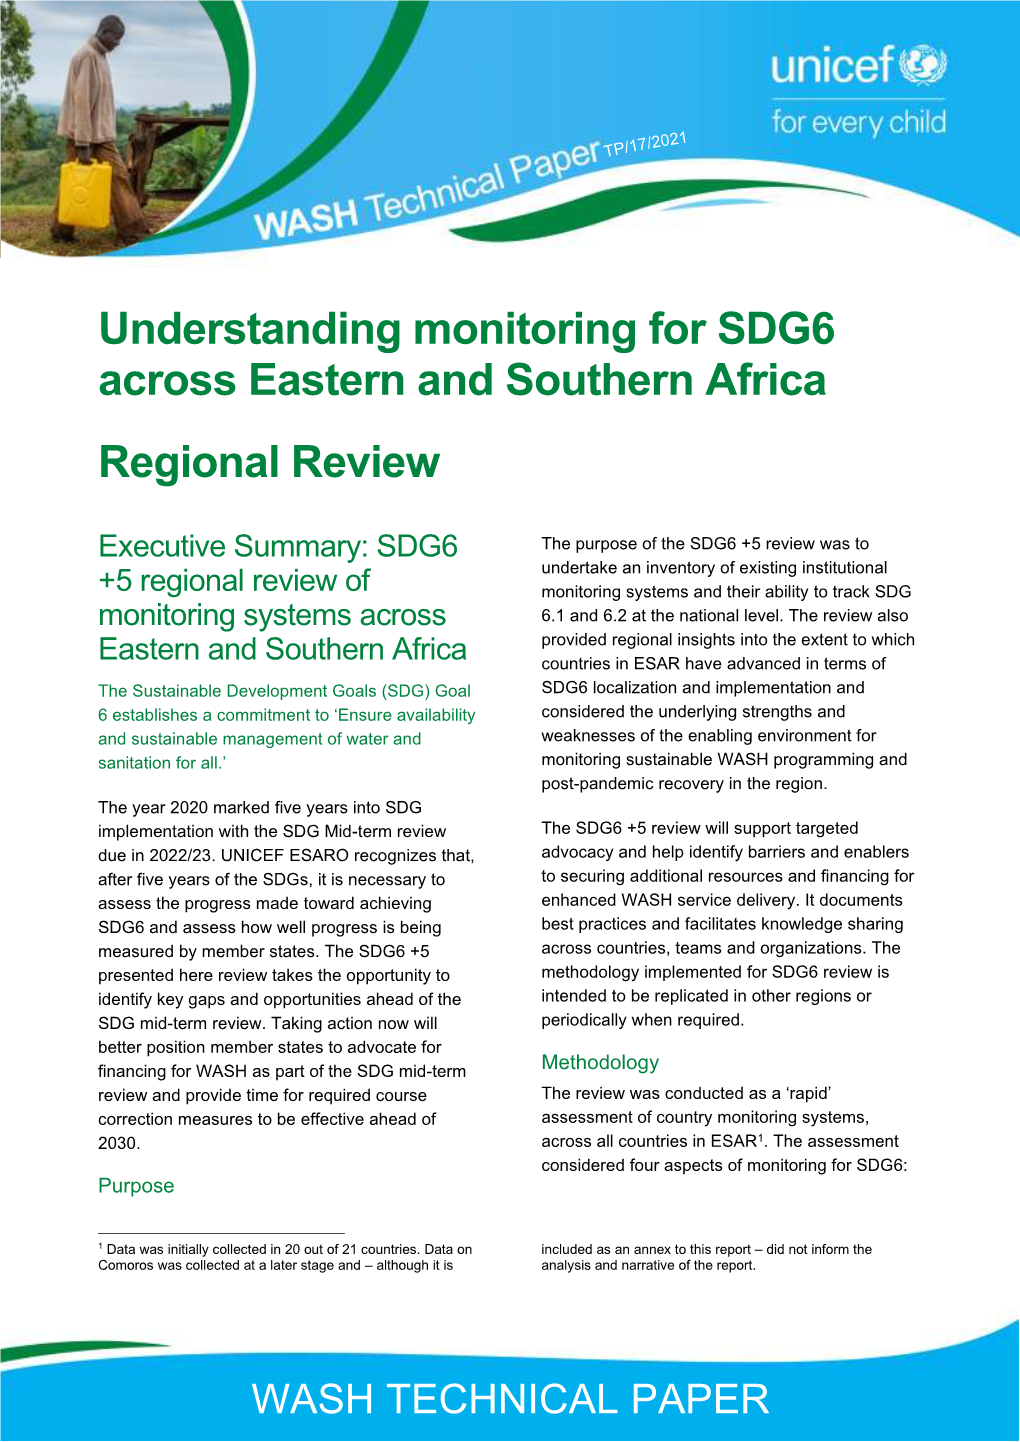 Understanding Monitoring for SDG6 Across Eastern and Southern Africa Regional Review